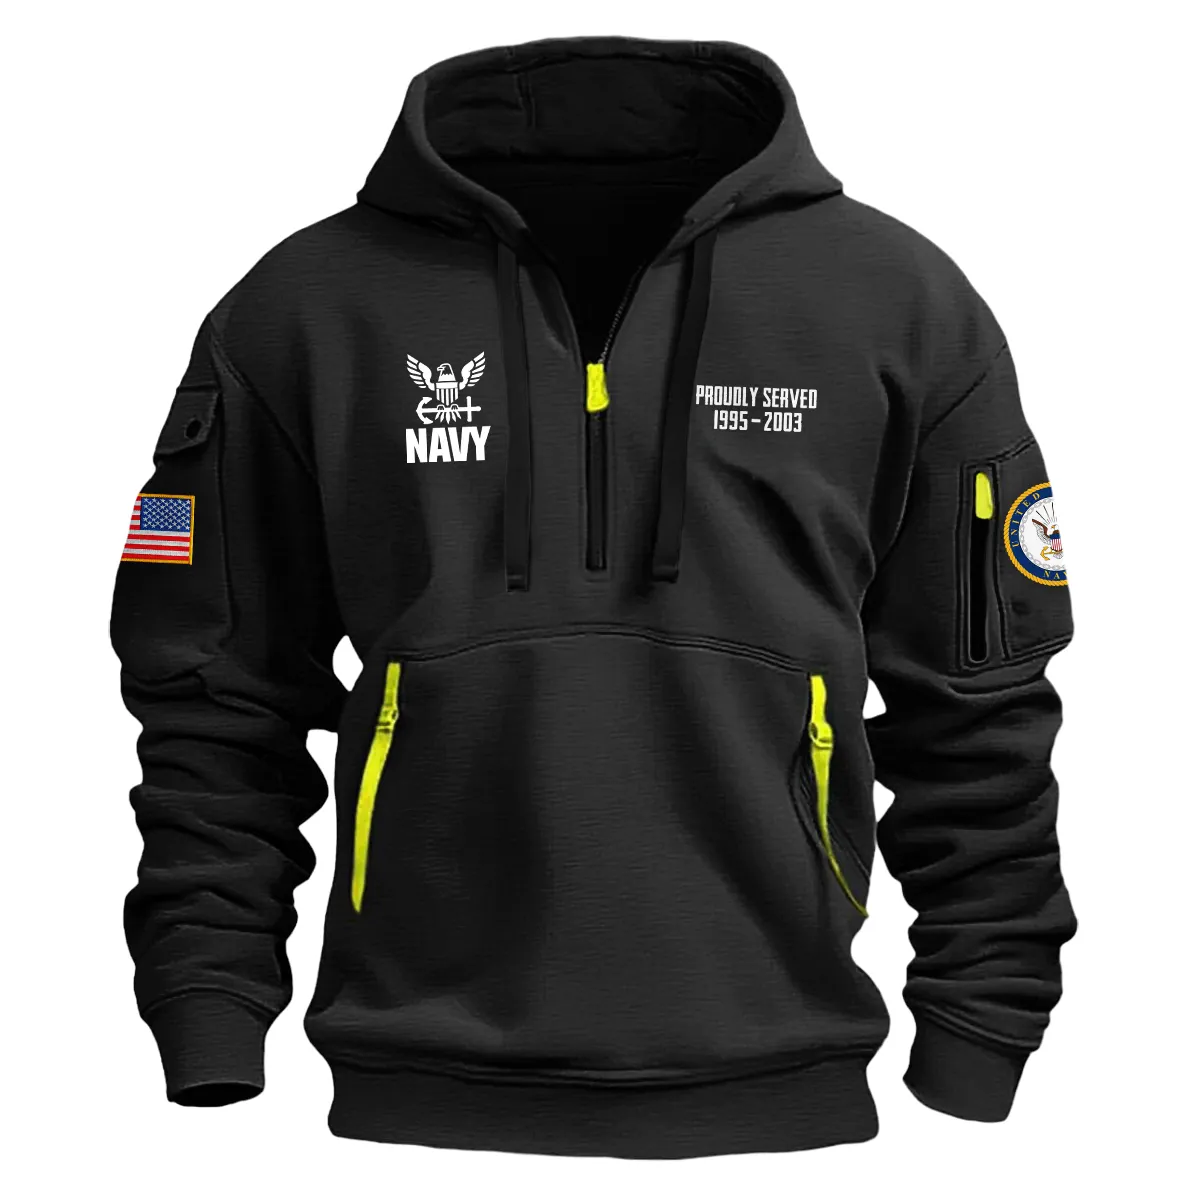 US Military All Branches! Personalized Gift Petty Officer 1st Class U.S. Navy Fashion Hoodie Half Zipper